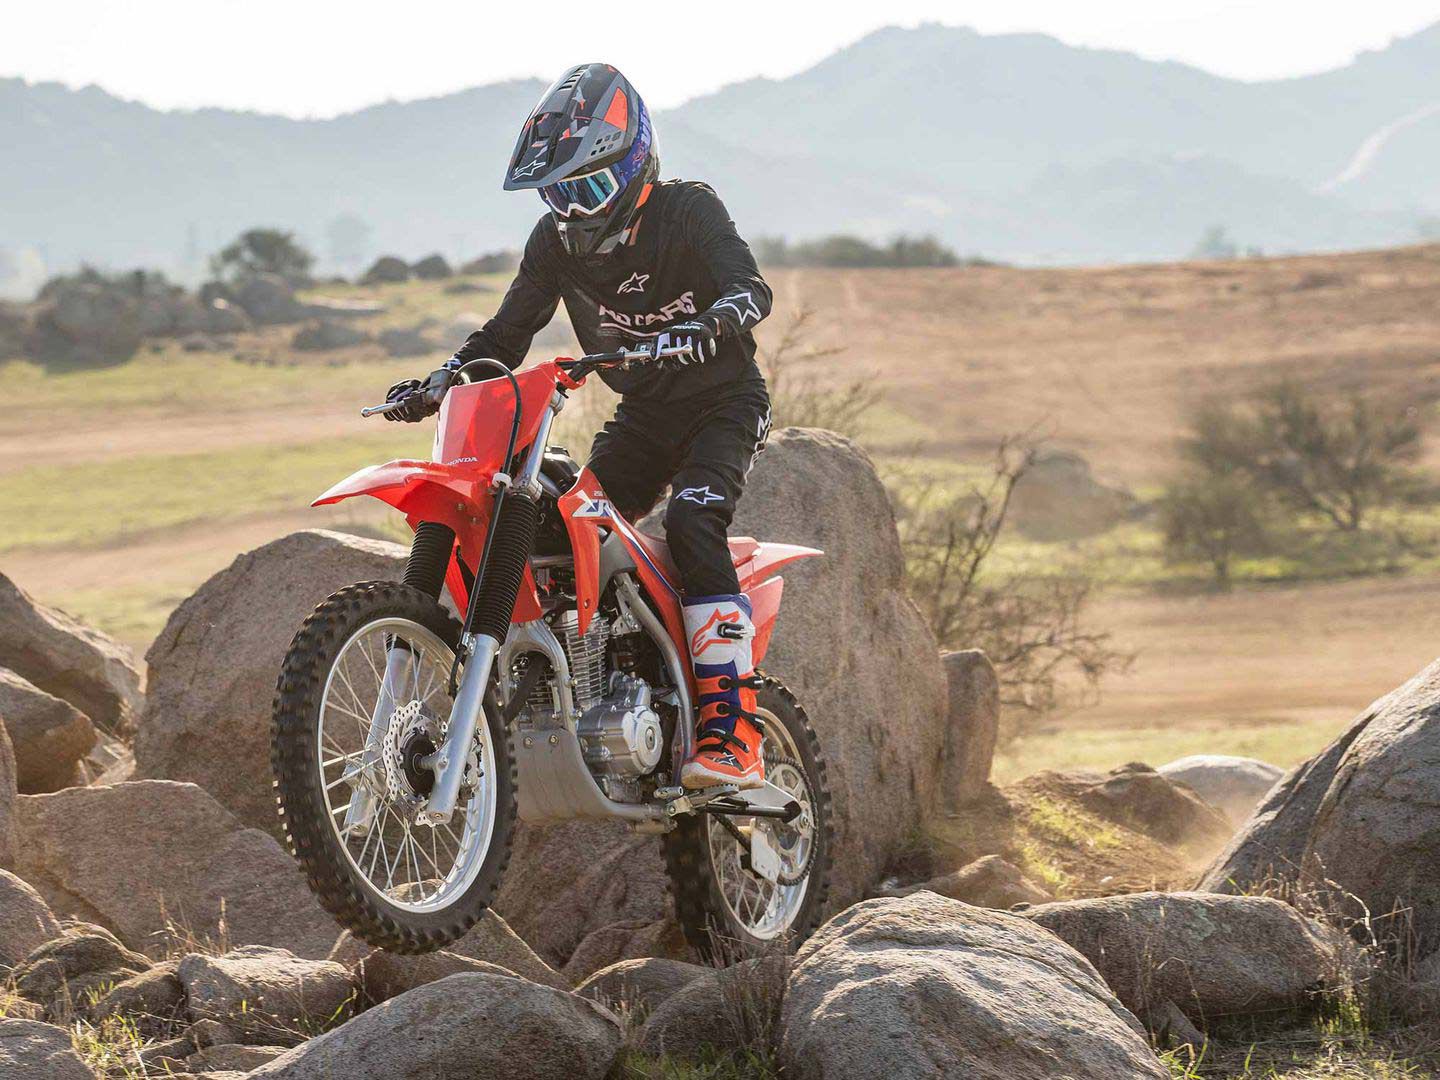 Honda pulled from its CRF performance line to give the CRF250F some race-inspired styling.